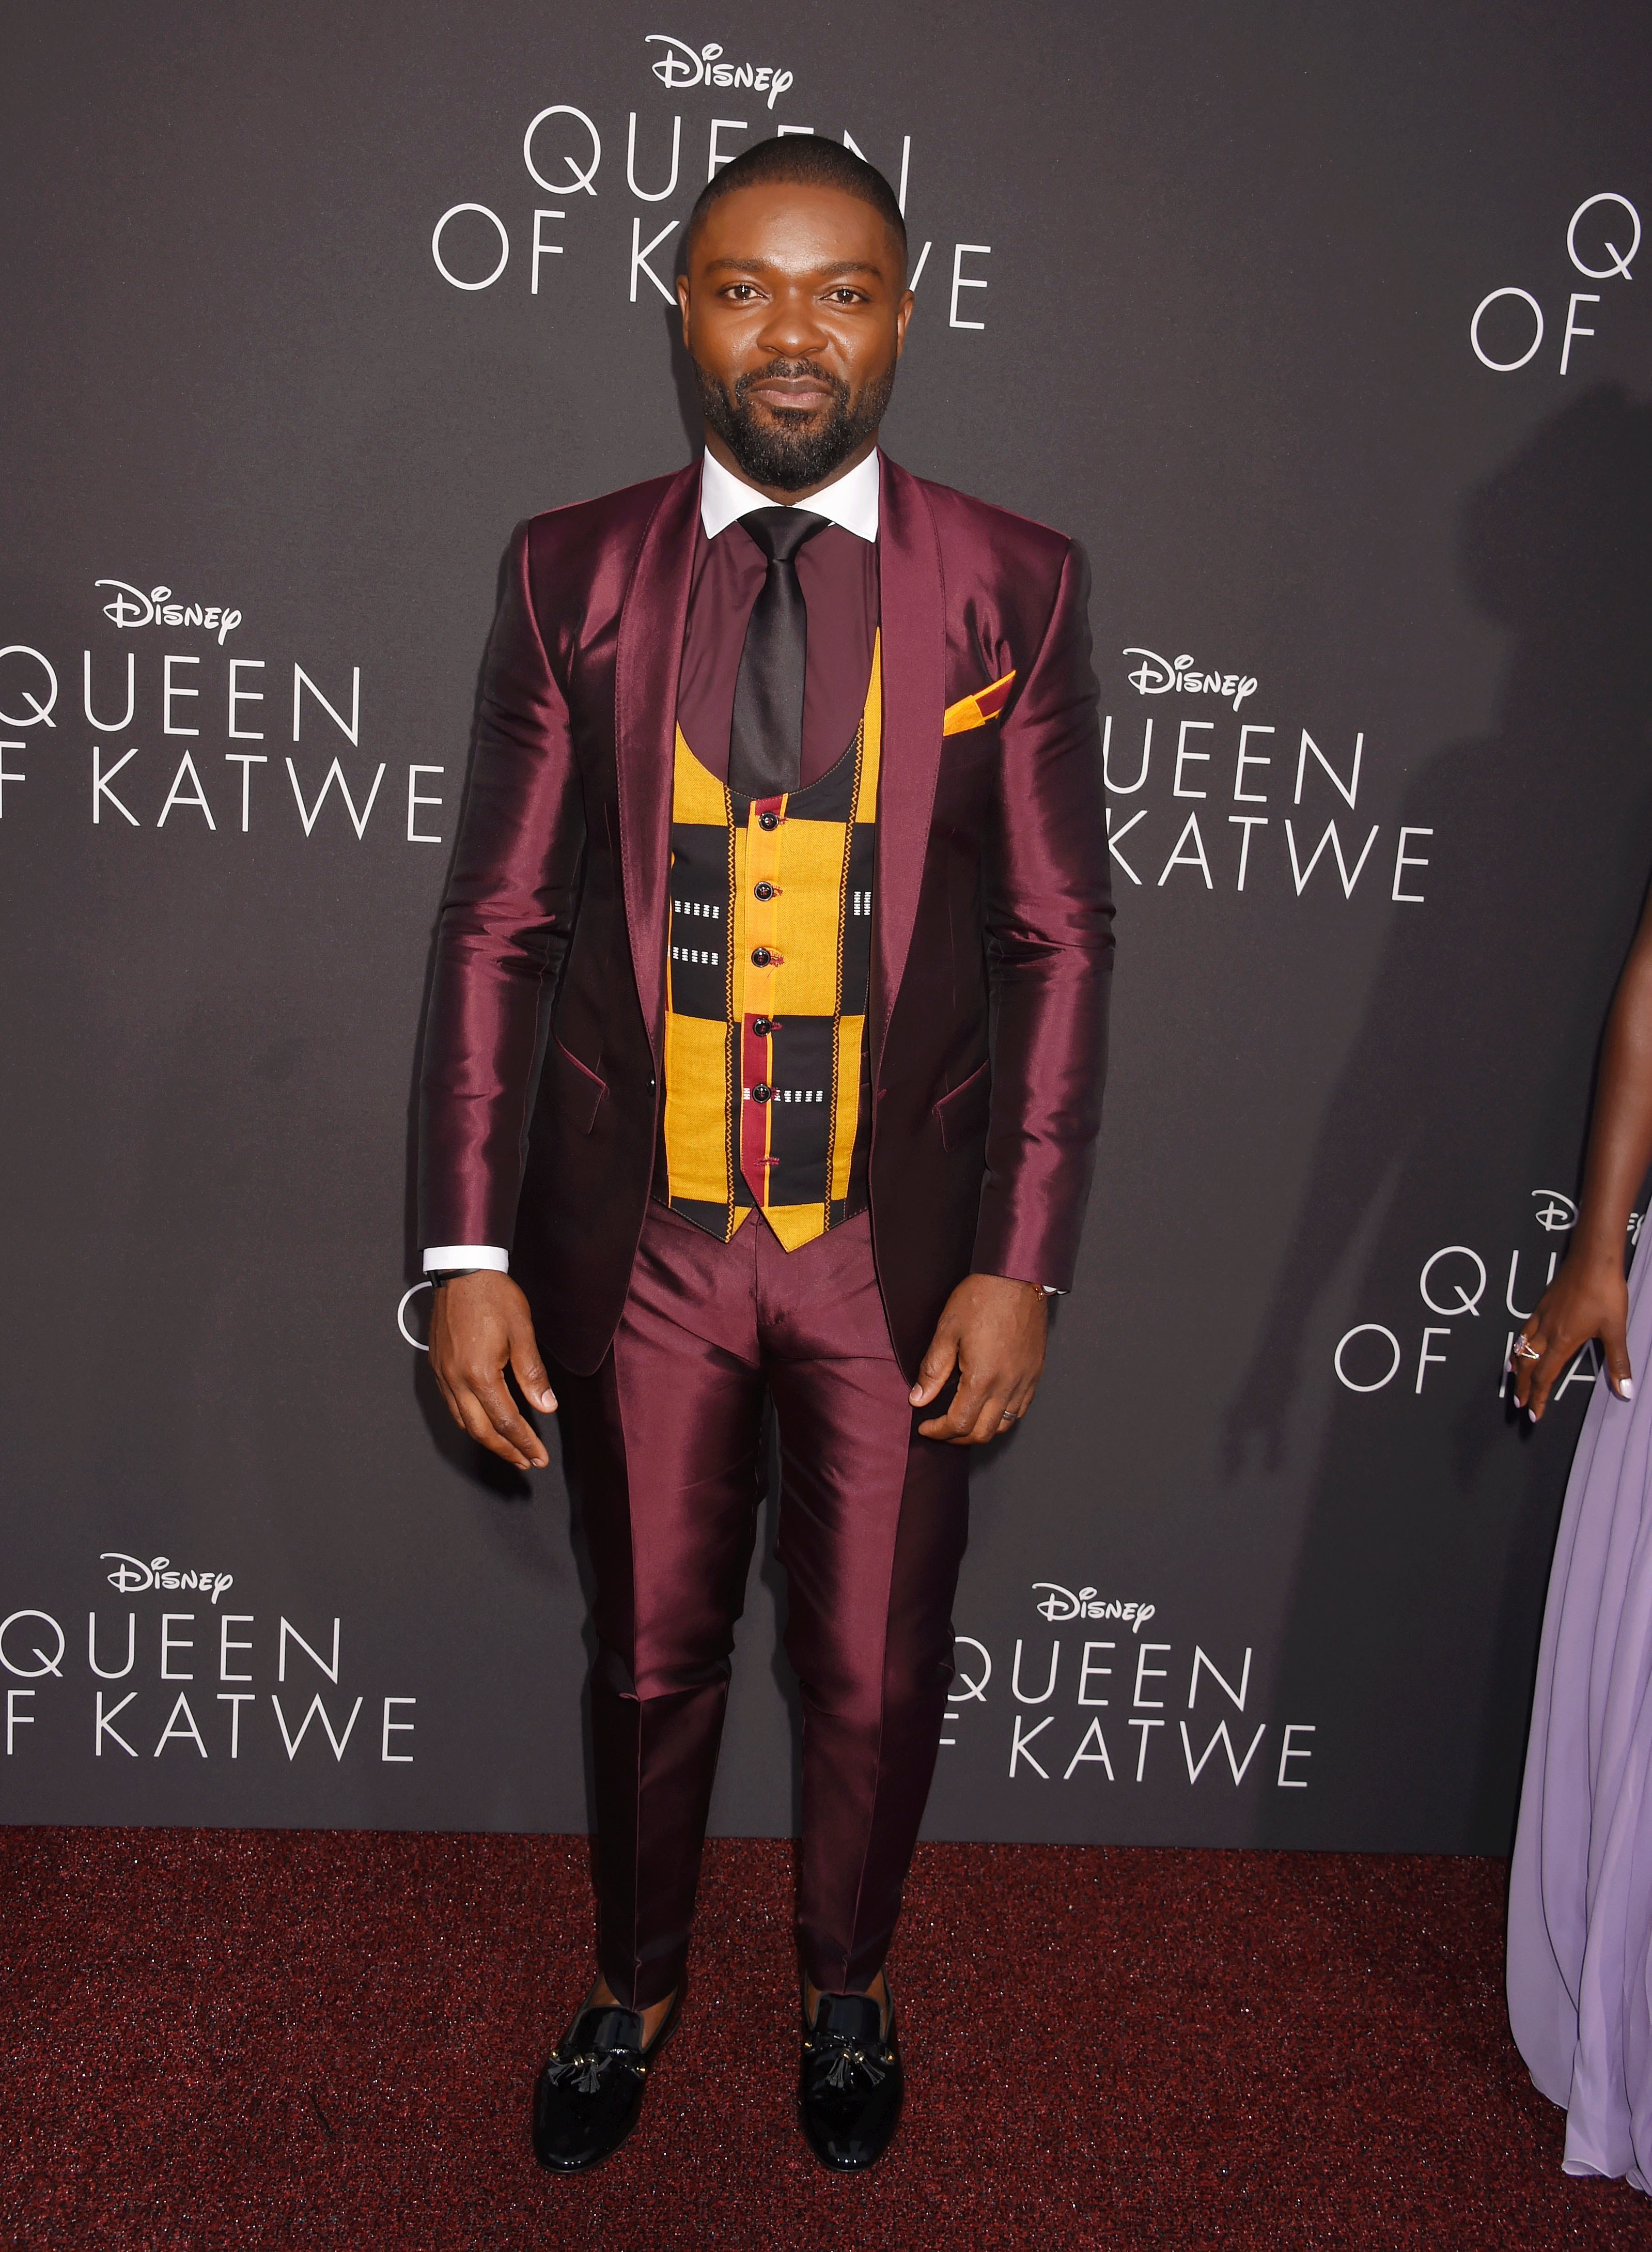 movie-premiere-david-oyelowo-and-family-in-custom-kutula-by-africana-for-queen-of-katwe-movie-premiere-2